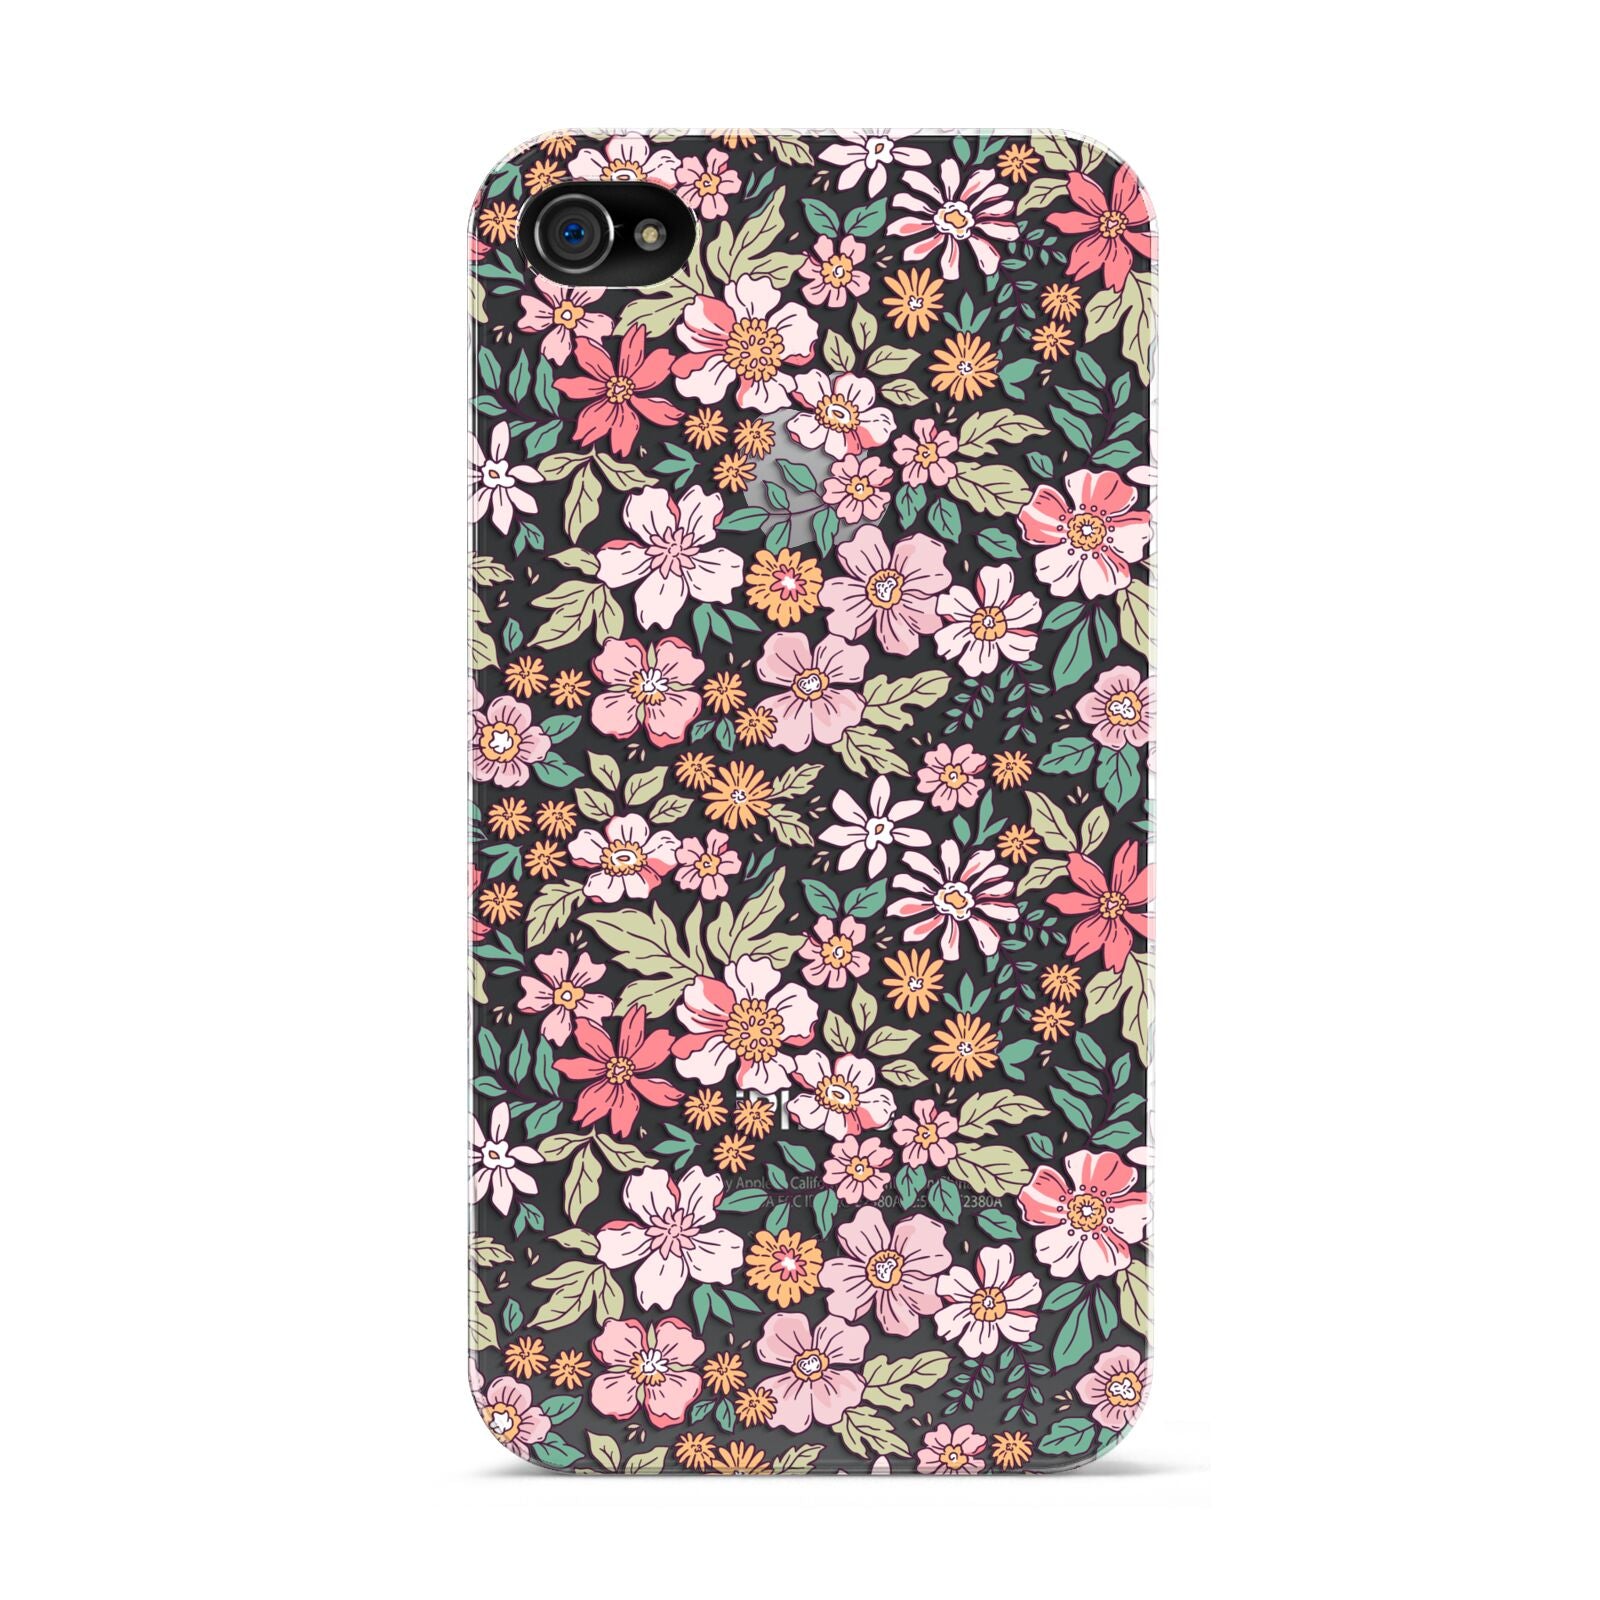 Small Floral Pattern Apple iPhone 4s Case